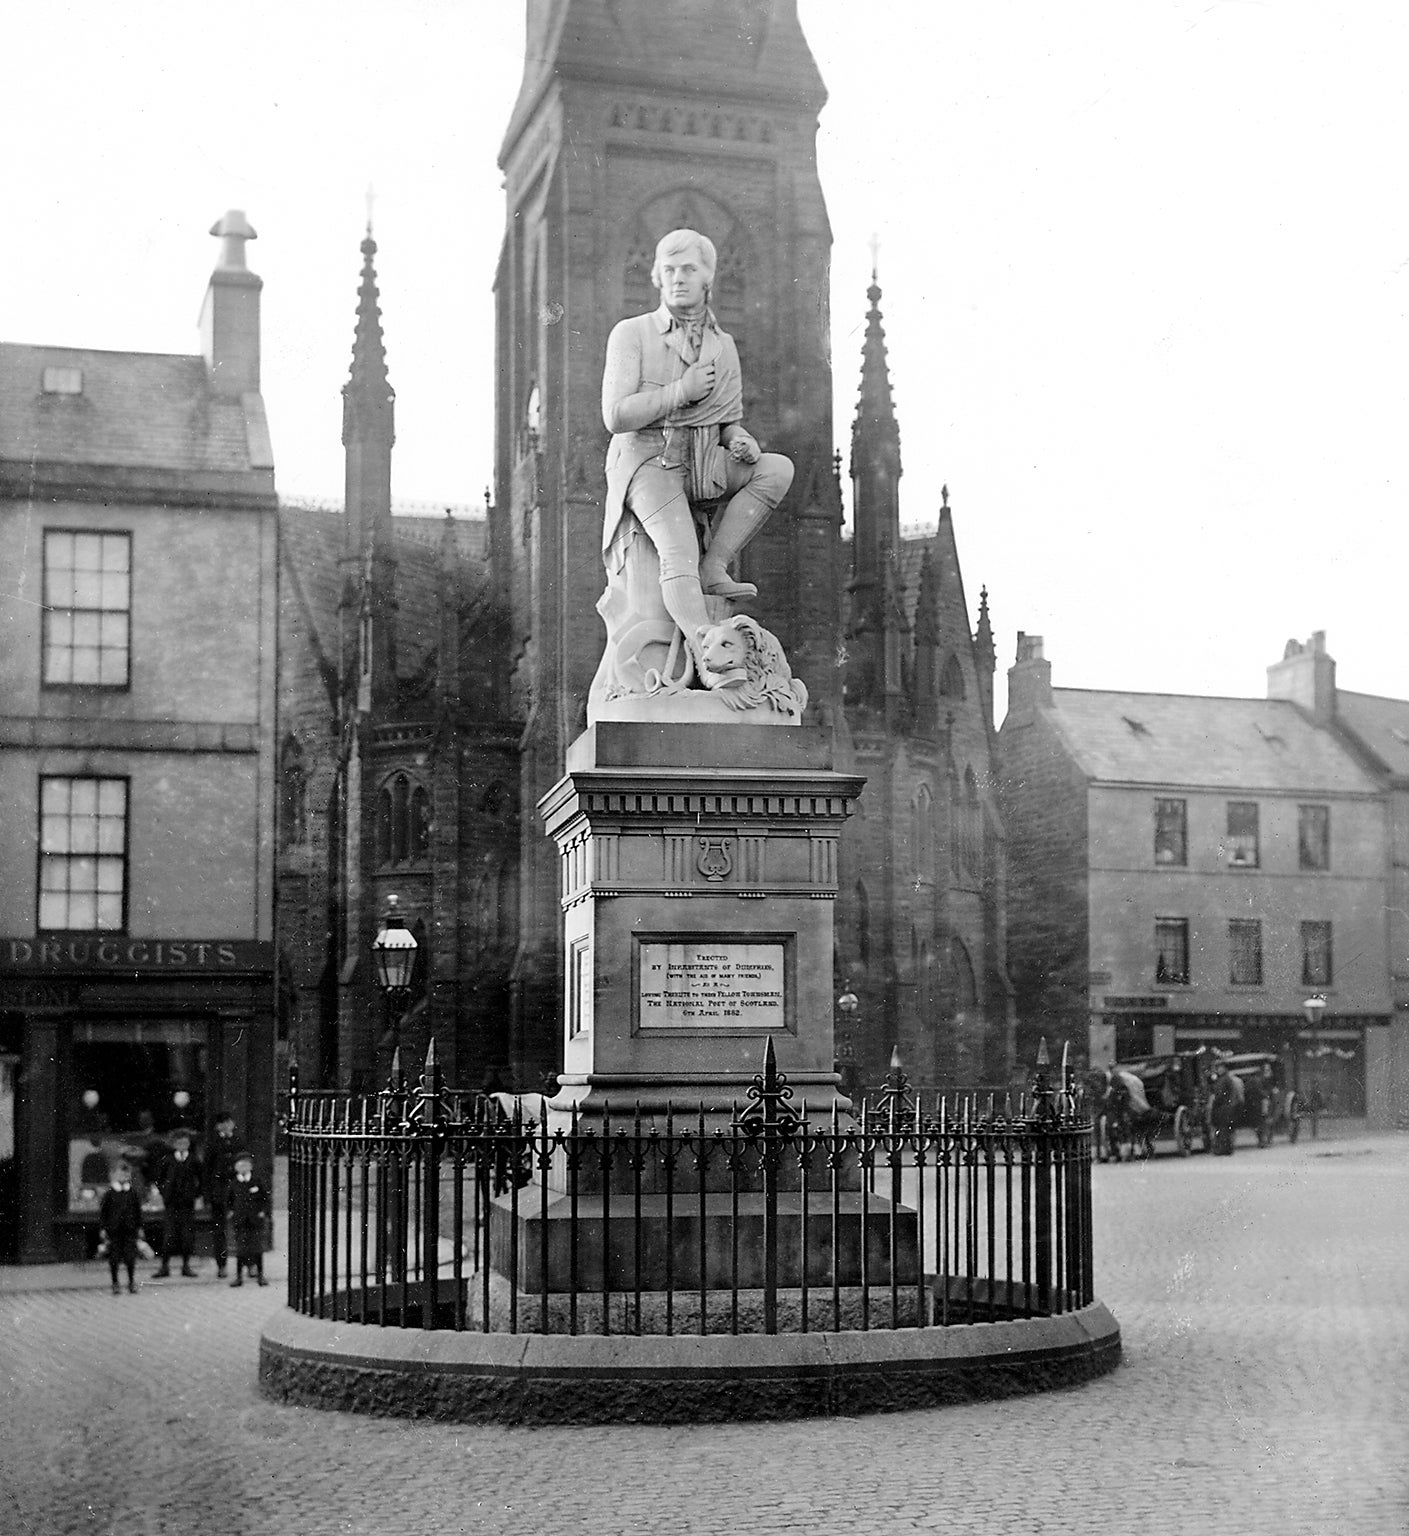 The Robert Burns monument in Dumfries (London Stereoscopic Company/Hulton Archive/Getty)